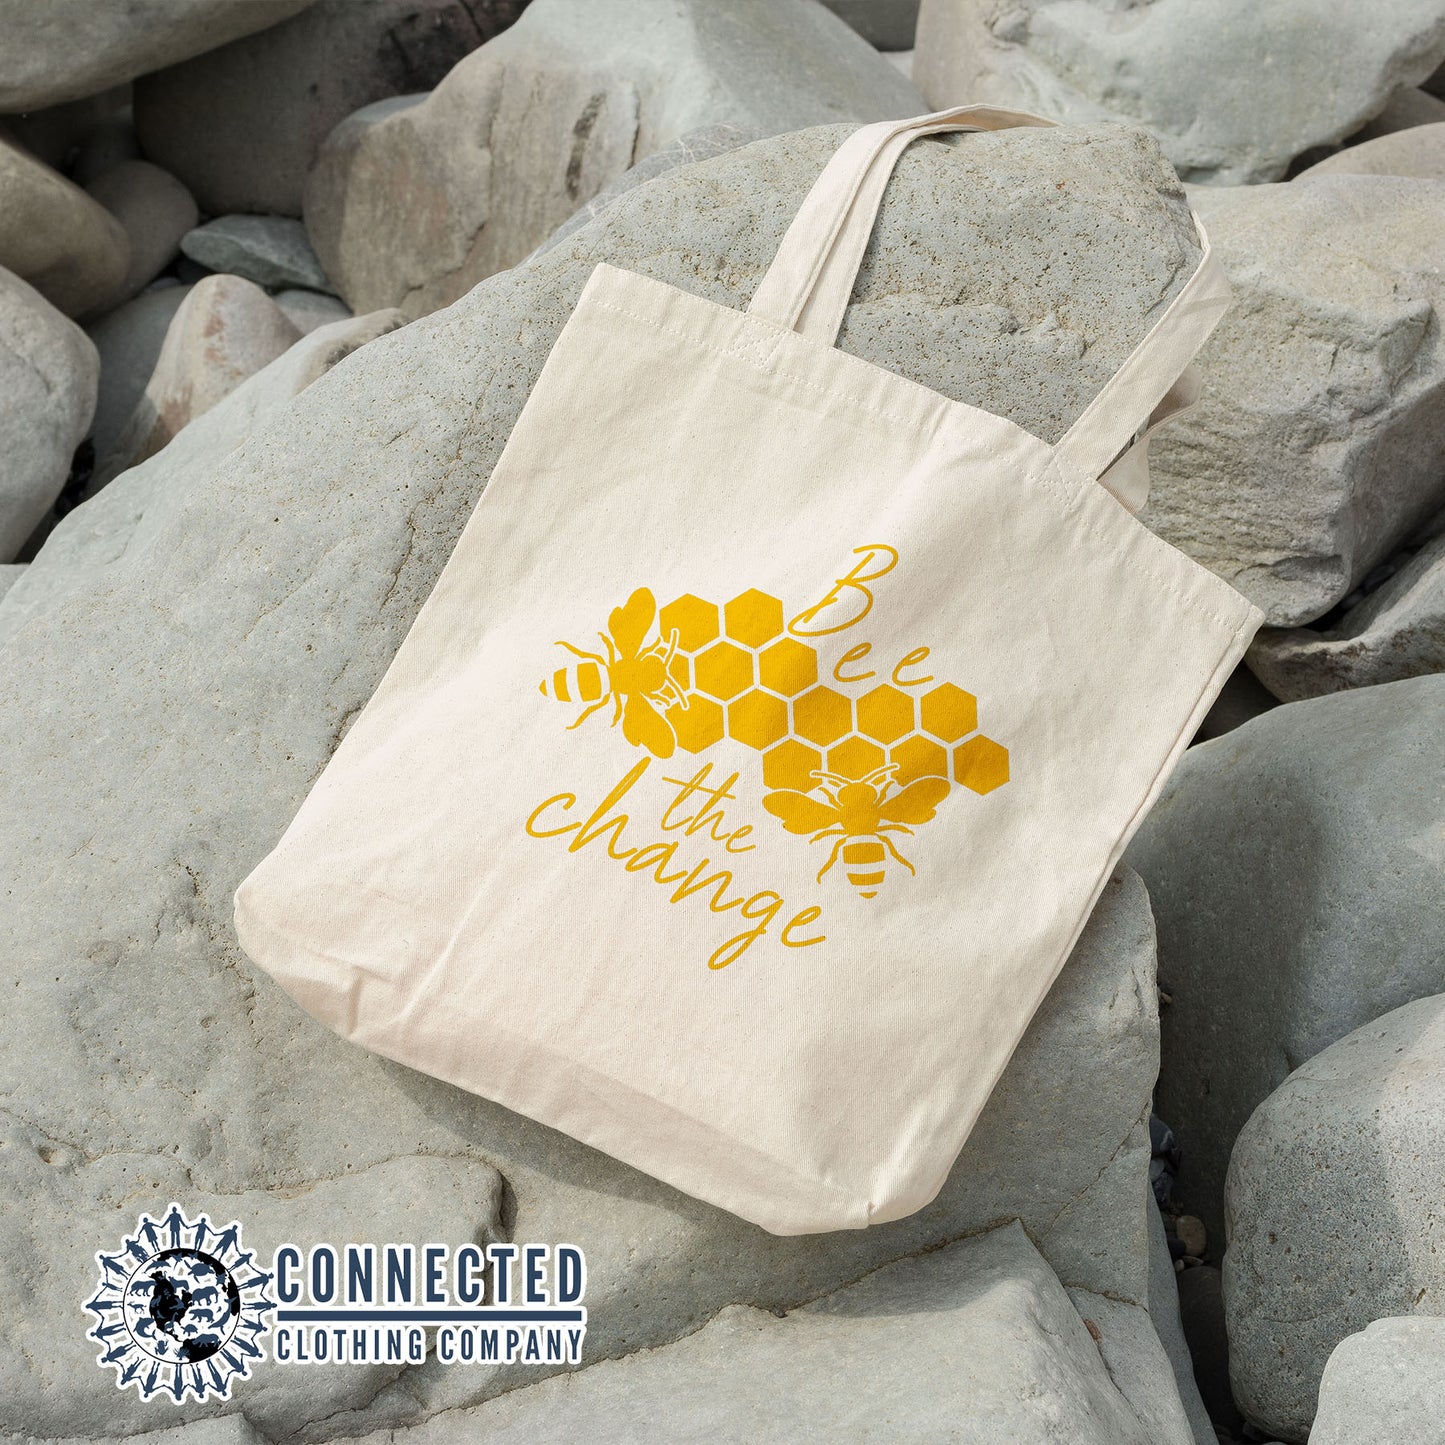 Bee The Change Tote Bag - Connected Clothing Company - 10% of profits donated to the Honeybee Conservancy